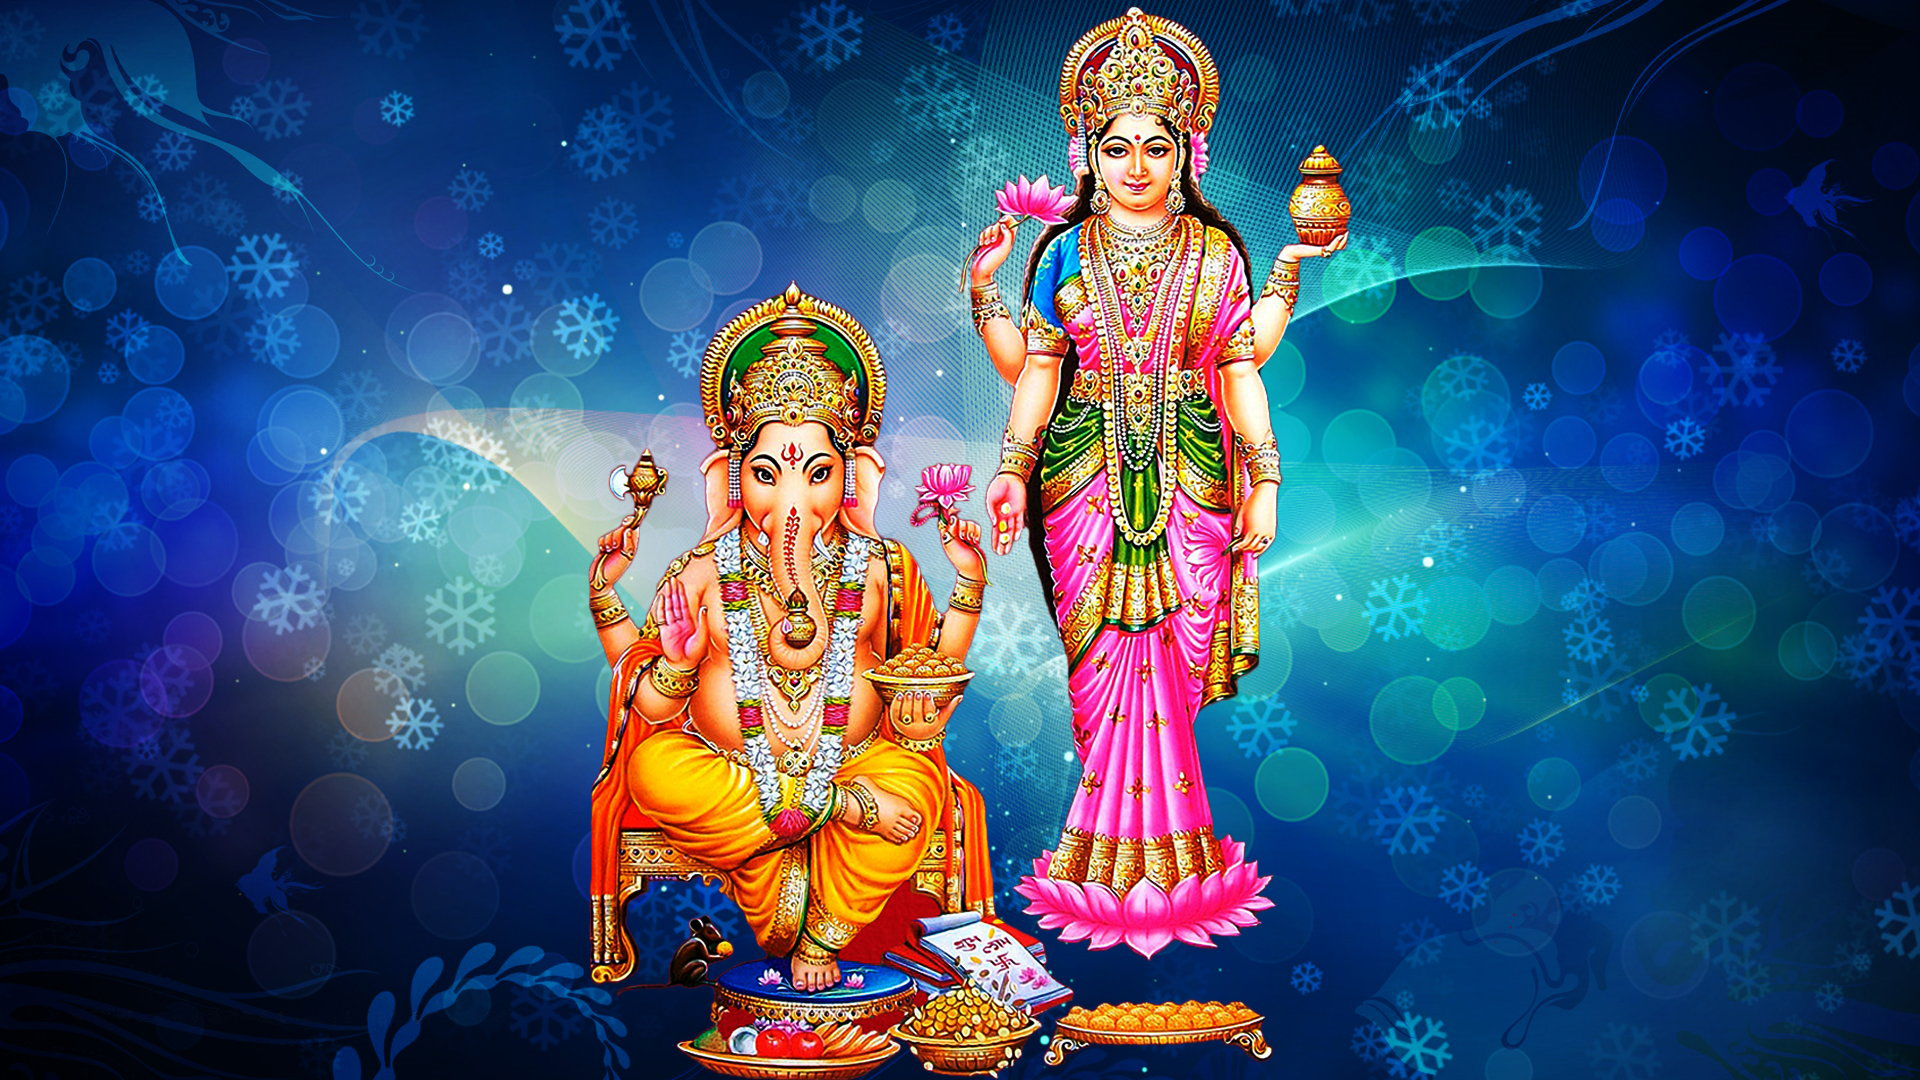 Goddess Laxmi And Lord Ganesh Blue Decorative Background With Snowflakes Hd  Wallpaper 1920x1080 : 